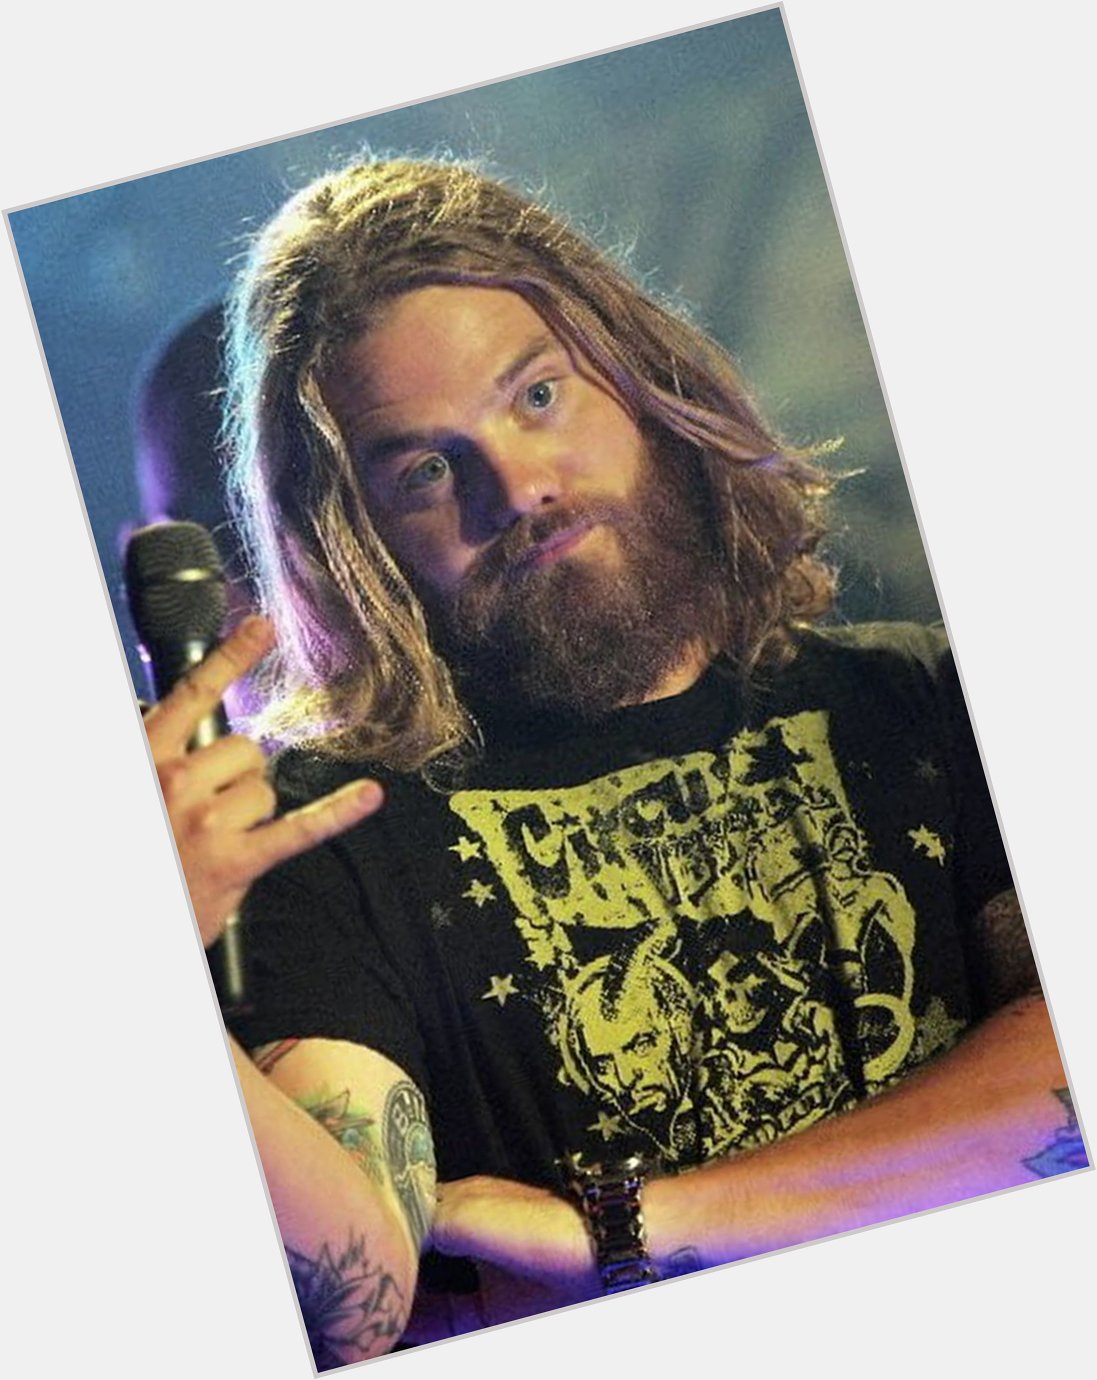 Happy birthday bro, you were literally the inspiration of me wanting a beard as a kid.. RIP Ryan Dunn 